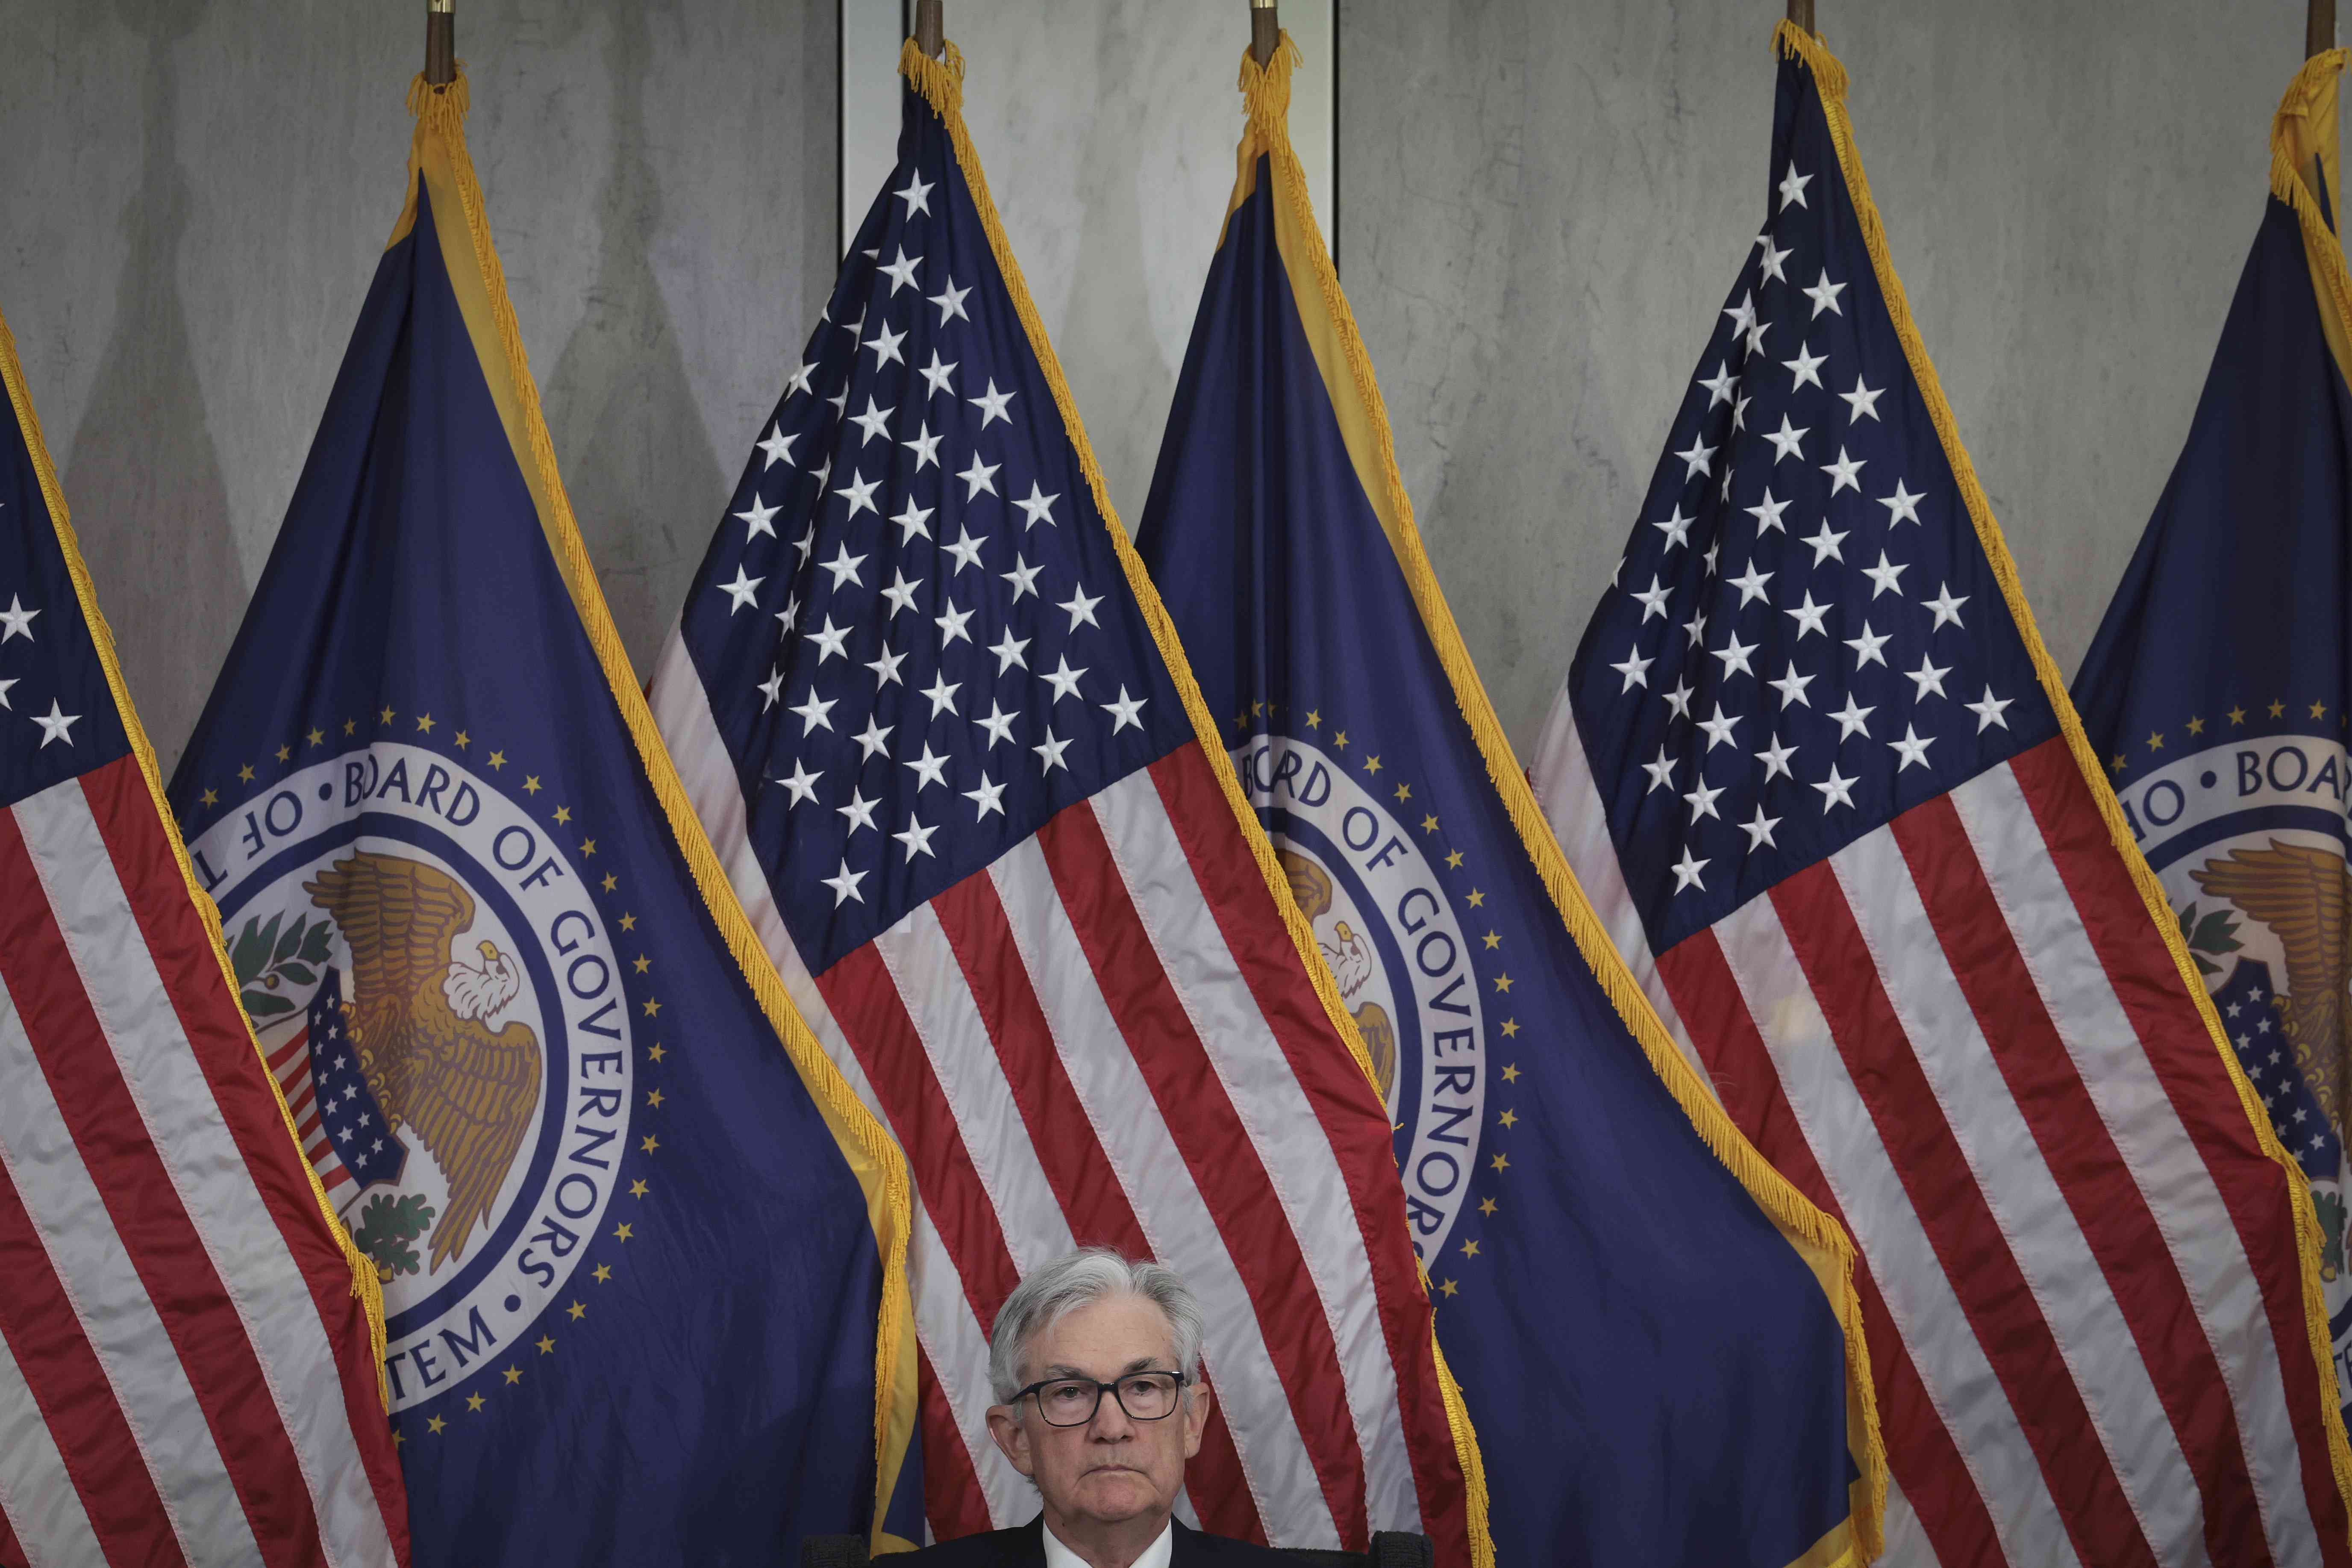 Federal Reserve Chairman Jerome Powell speaks at the Thomas Laubach Research Conference on key issues in monetary policy and the economy held by the Federal Reserve Board of Governors May 19, 2023 in Washington, D.C.